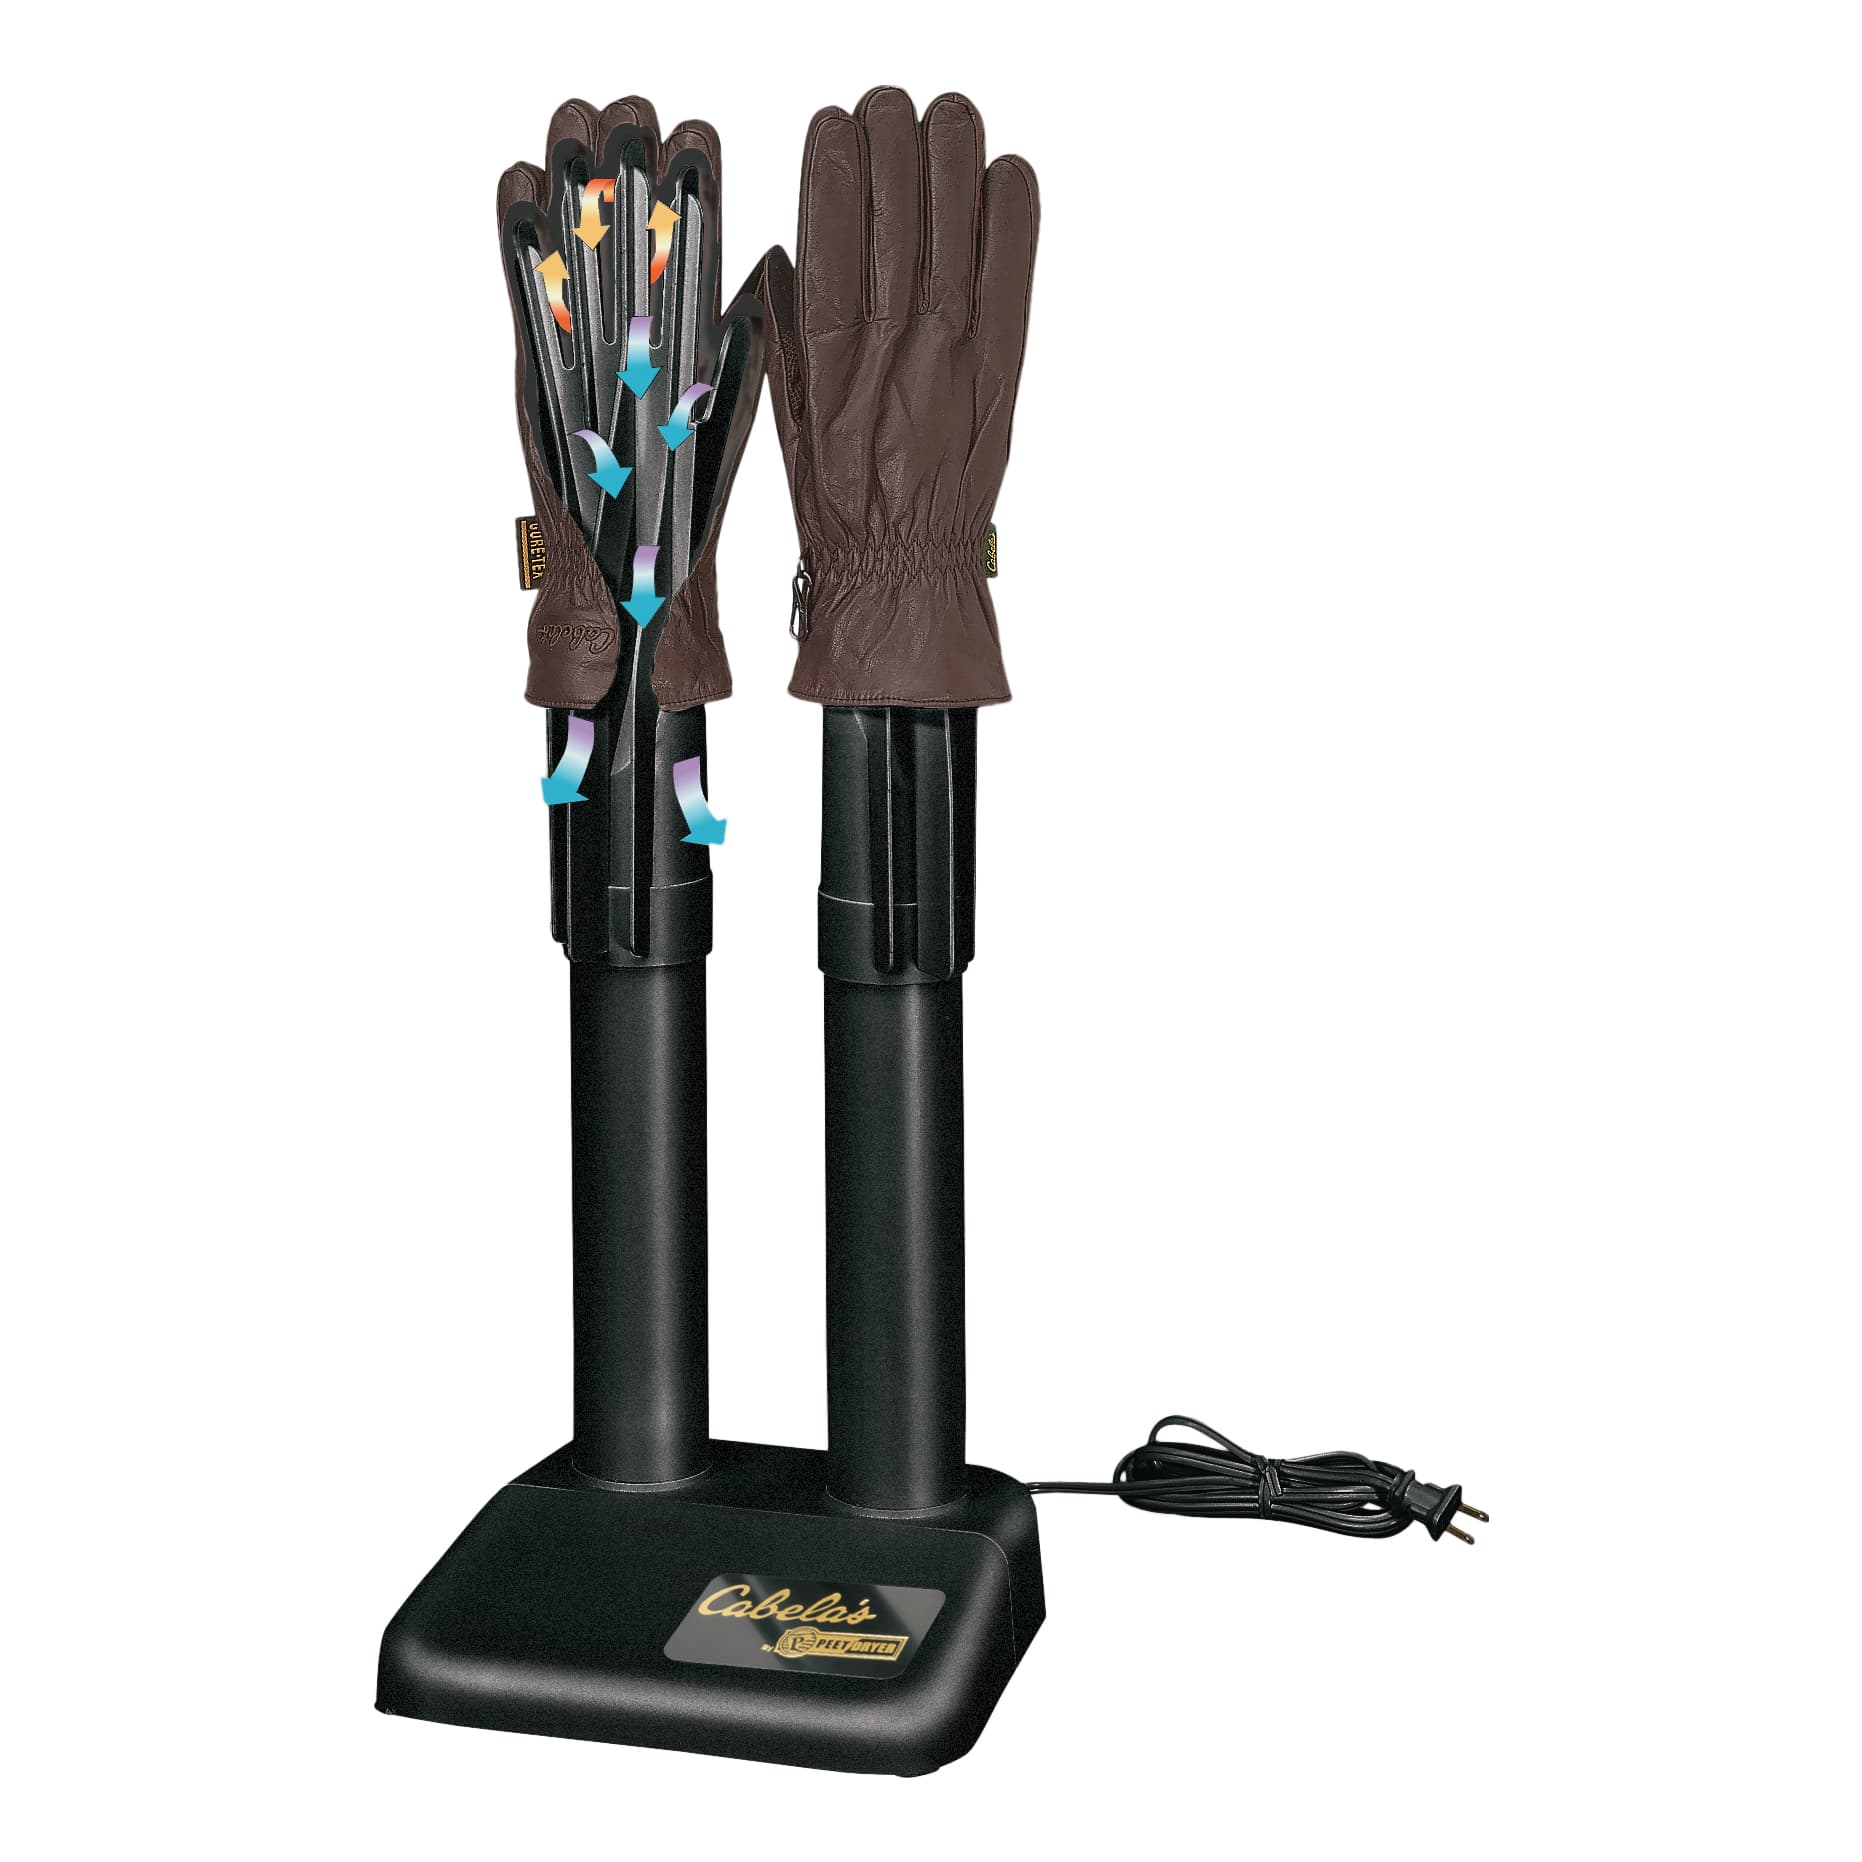 Cabela's Glove Drying Attachment by Peet®